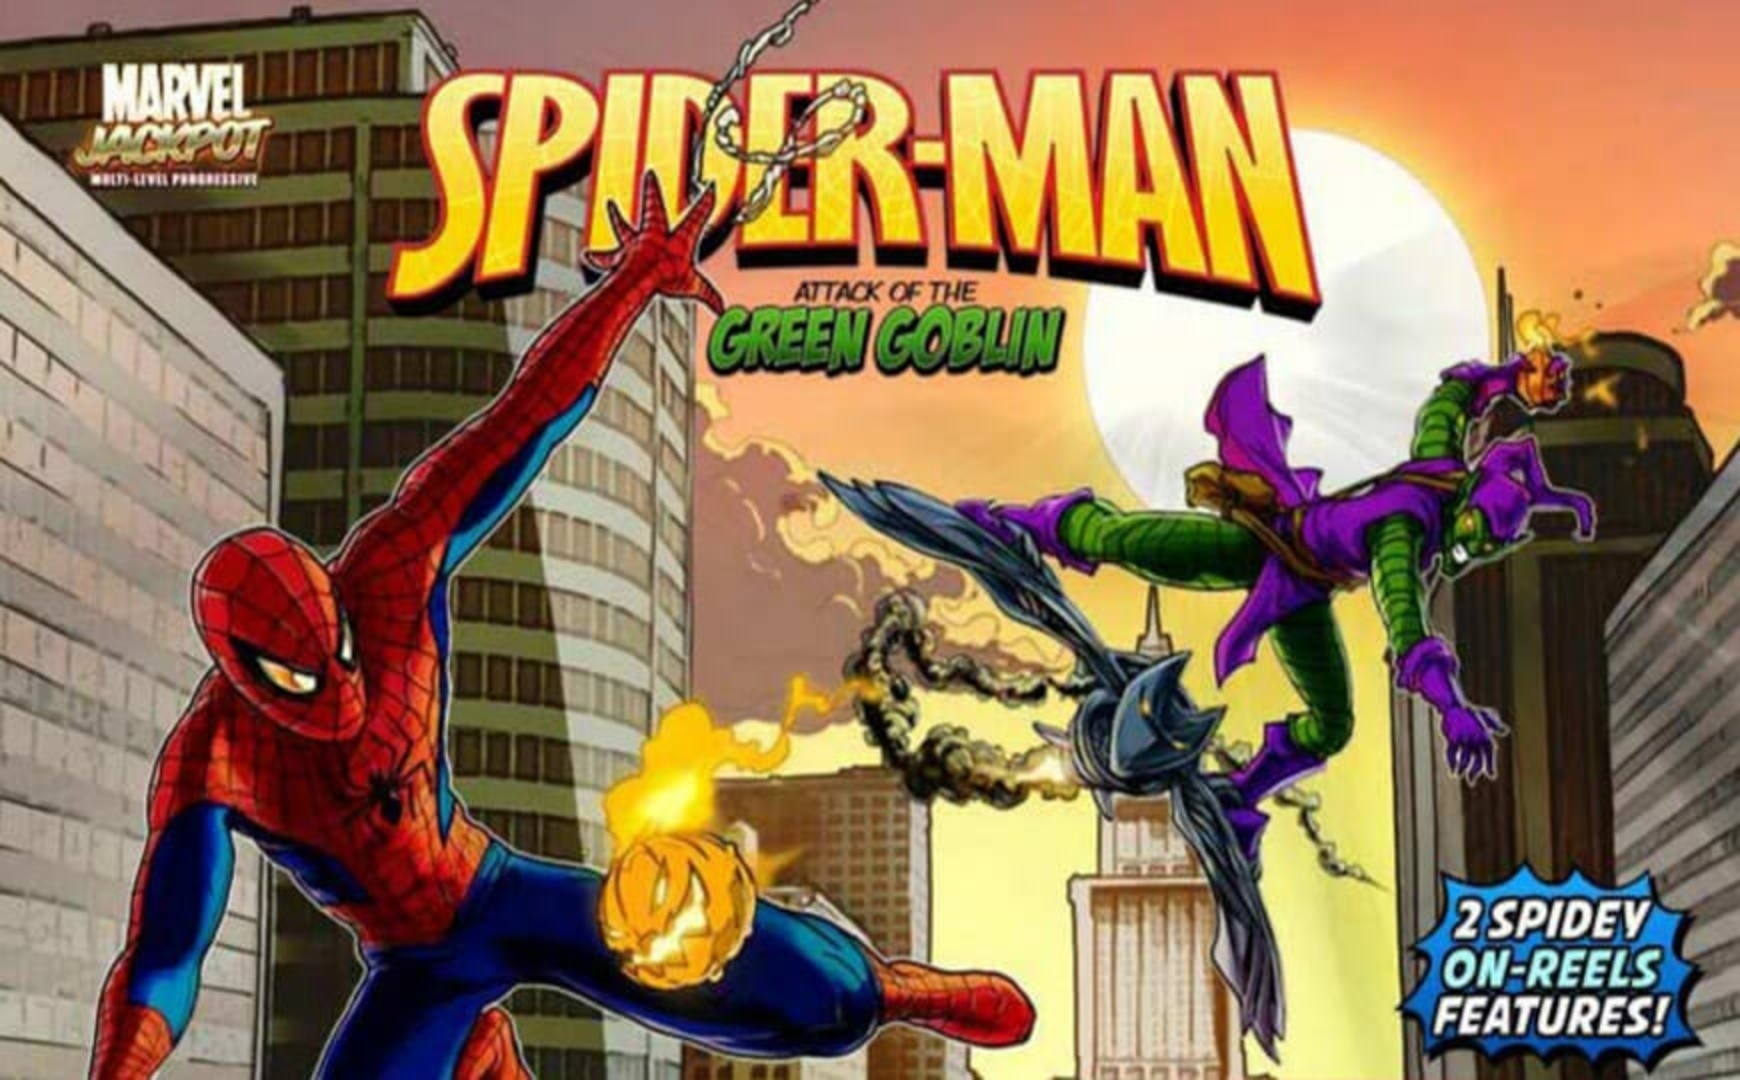 The Spider-Man: Attack of the Green Goblin Online Slot Demo Game by Playtech